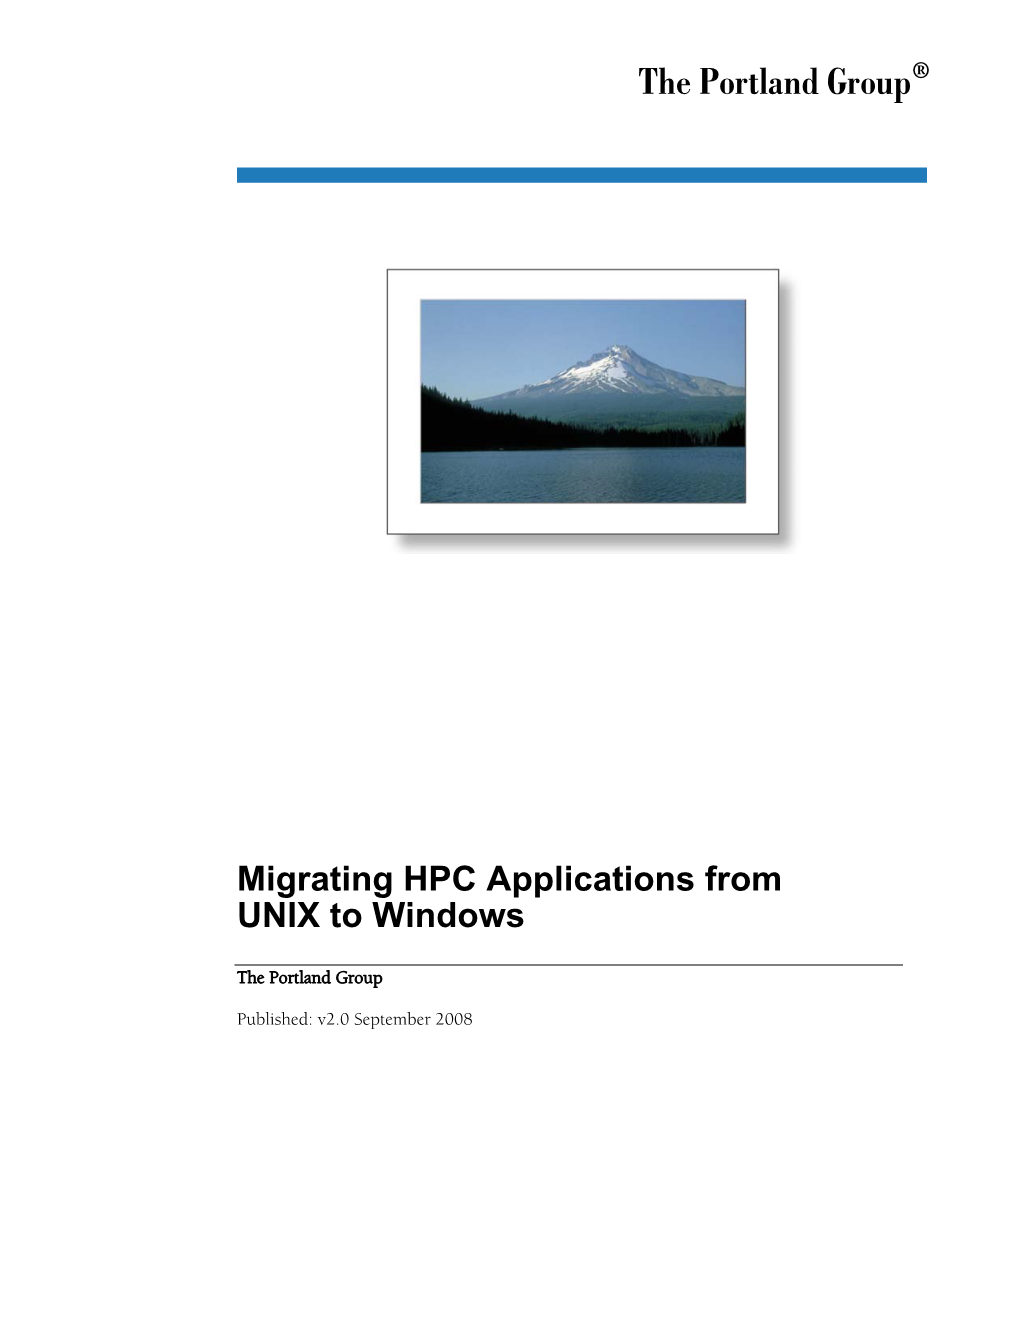 Migrating HPC Applications from UNIX to Windows